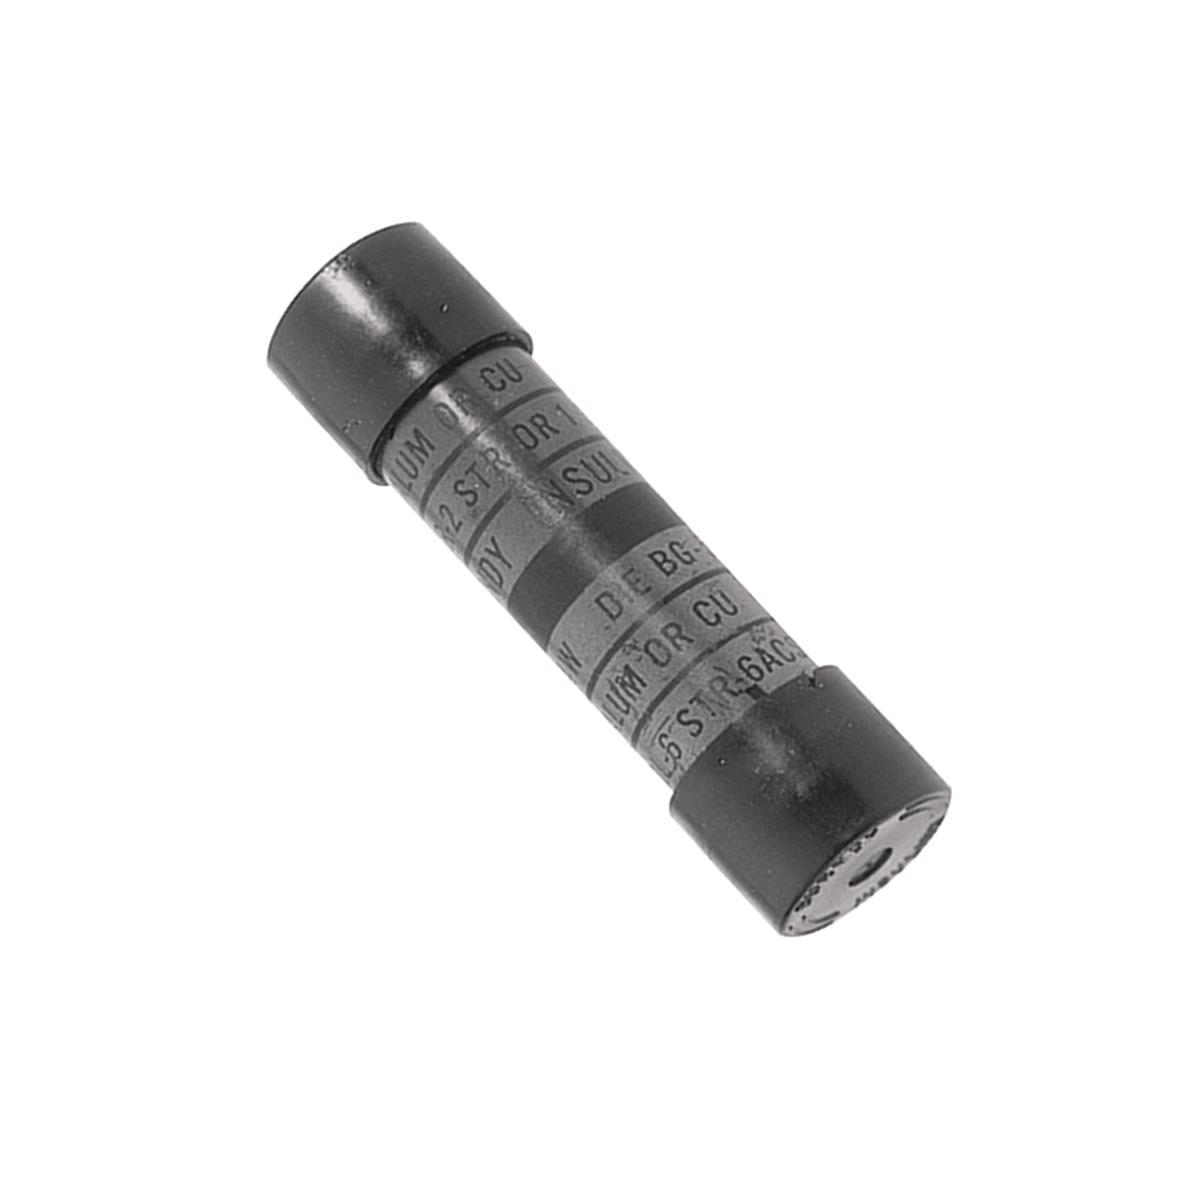 Hubbell ES25A25A Insulated AL service entrance compression sleeve for combinations of insulated CU, AL and ACSR conductors.  ; Features: Pre-Insulated Service Entrance Compression Connector Installed With OH25, OUR840 And MD6 HYTOOL As Well As Y35 And Y750 HYPRESS Tools, 